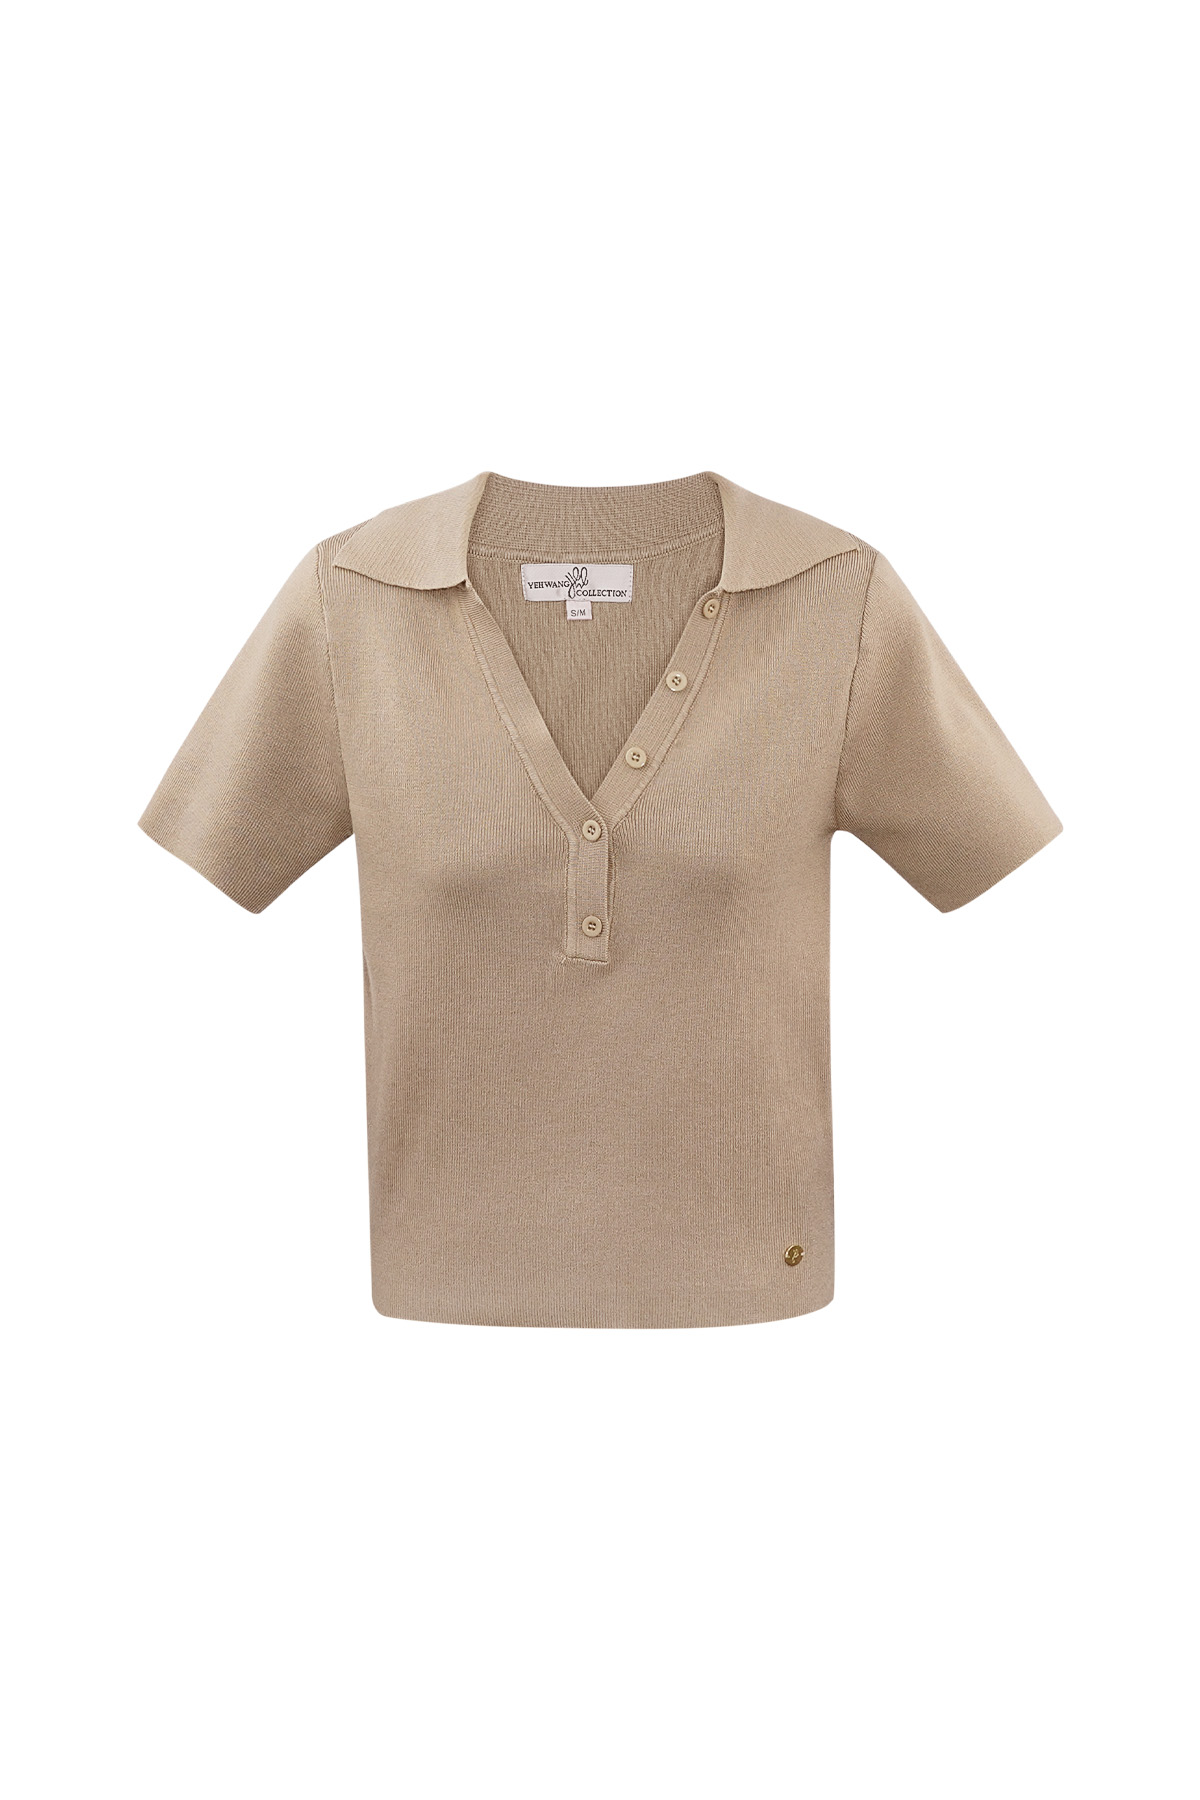 Polo half button-up large/extra large – beige